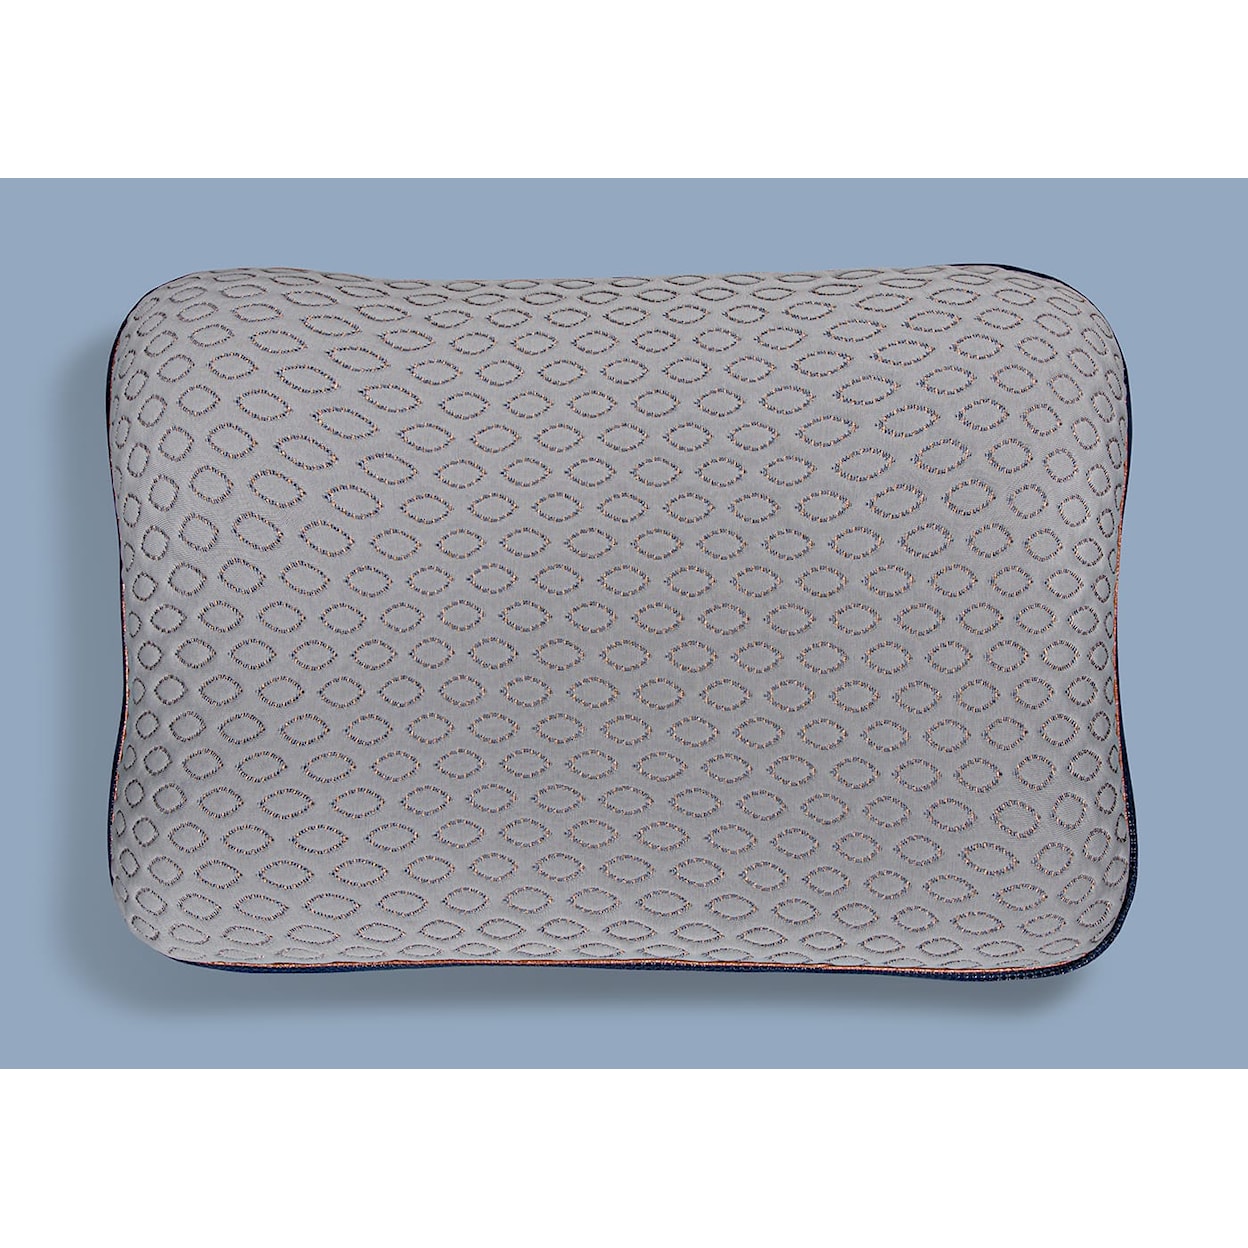 Bedgear Cosmo Cosmo Performance Pillow-2.0